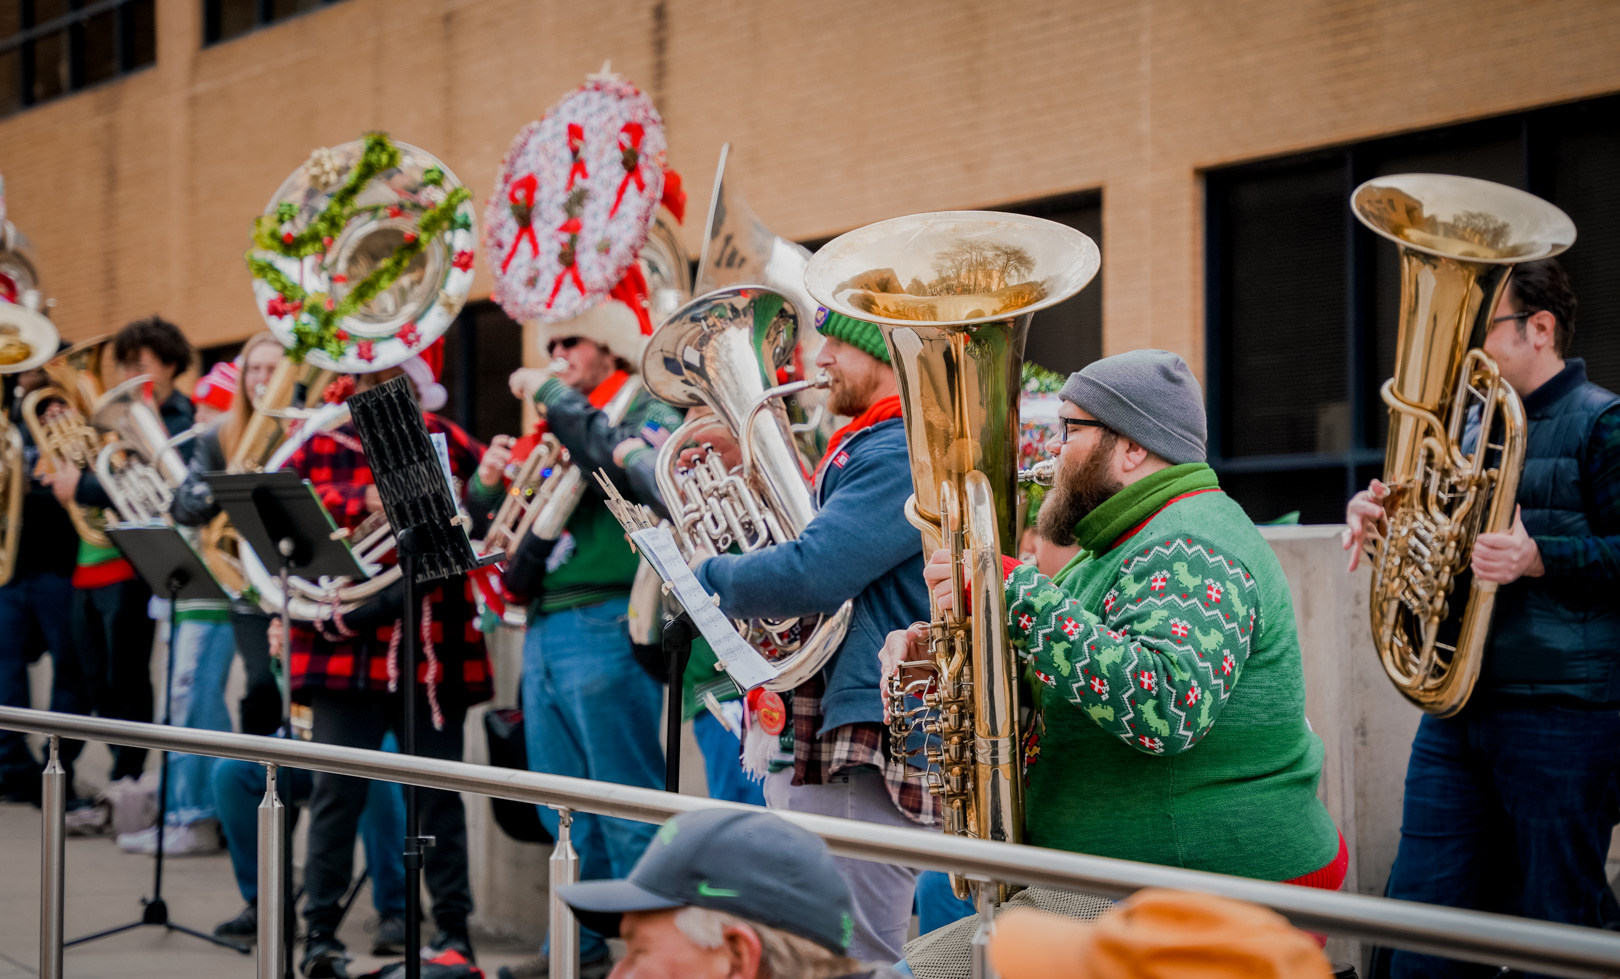 Sousaphone and tuba players with festively decorated instruments